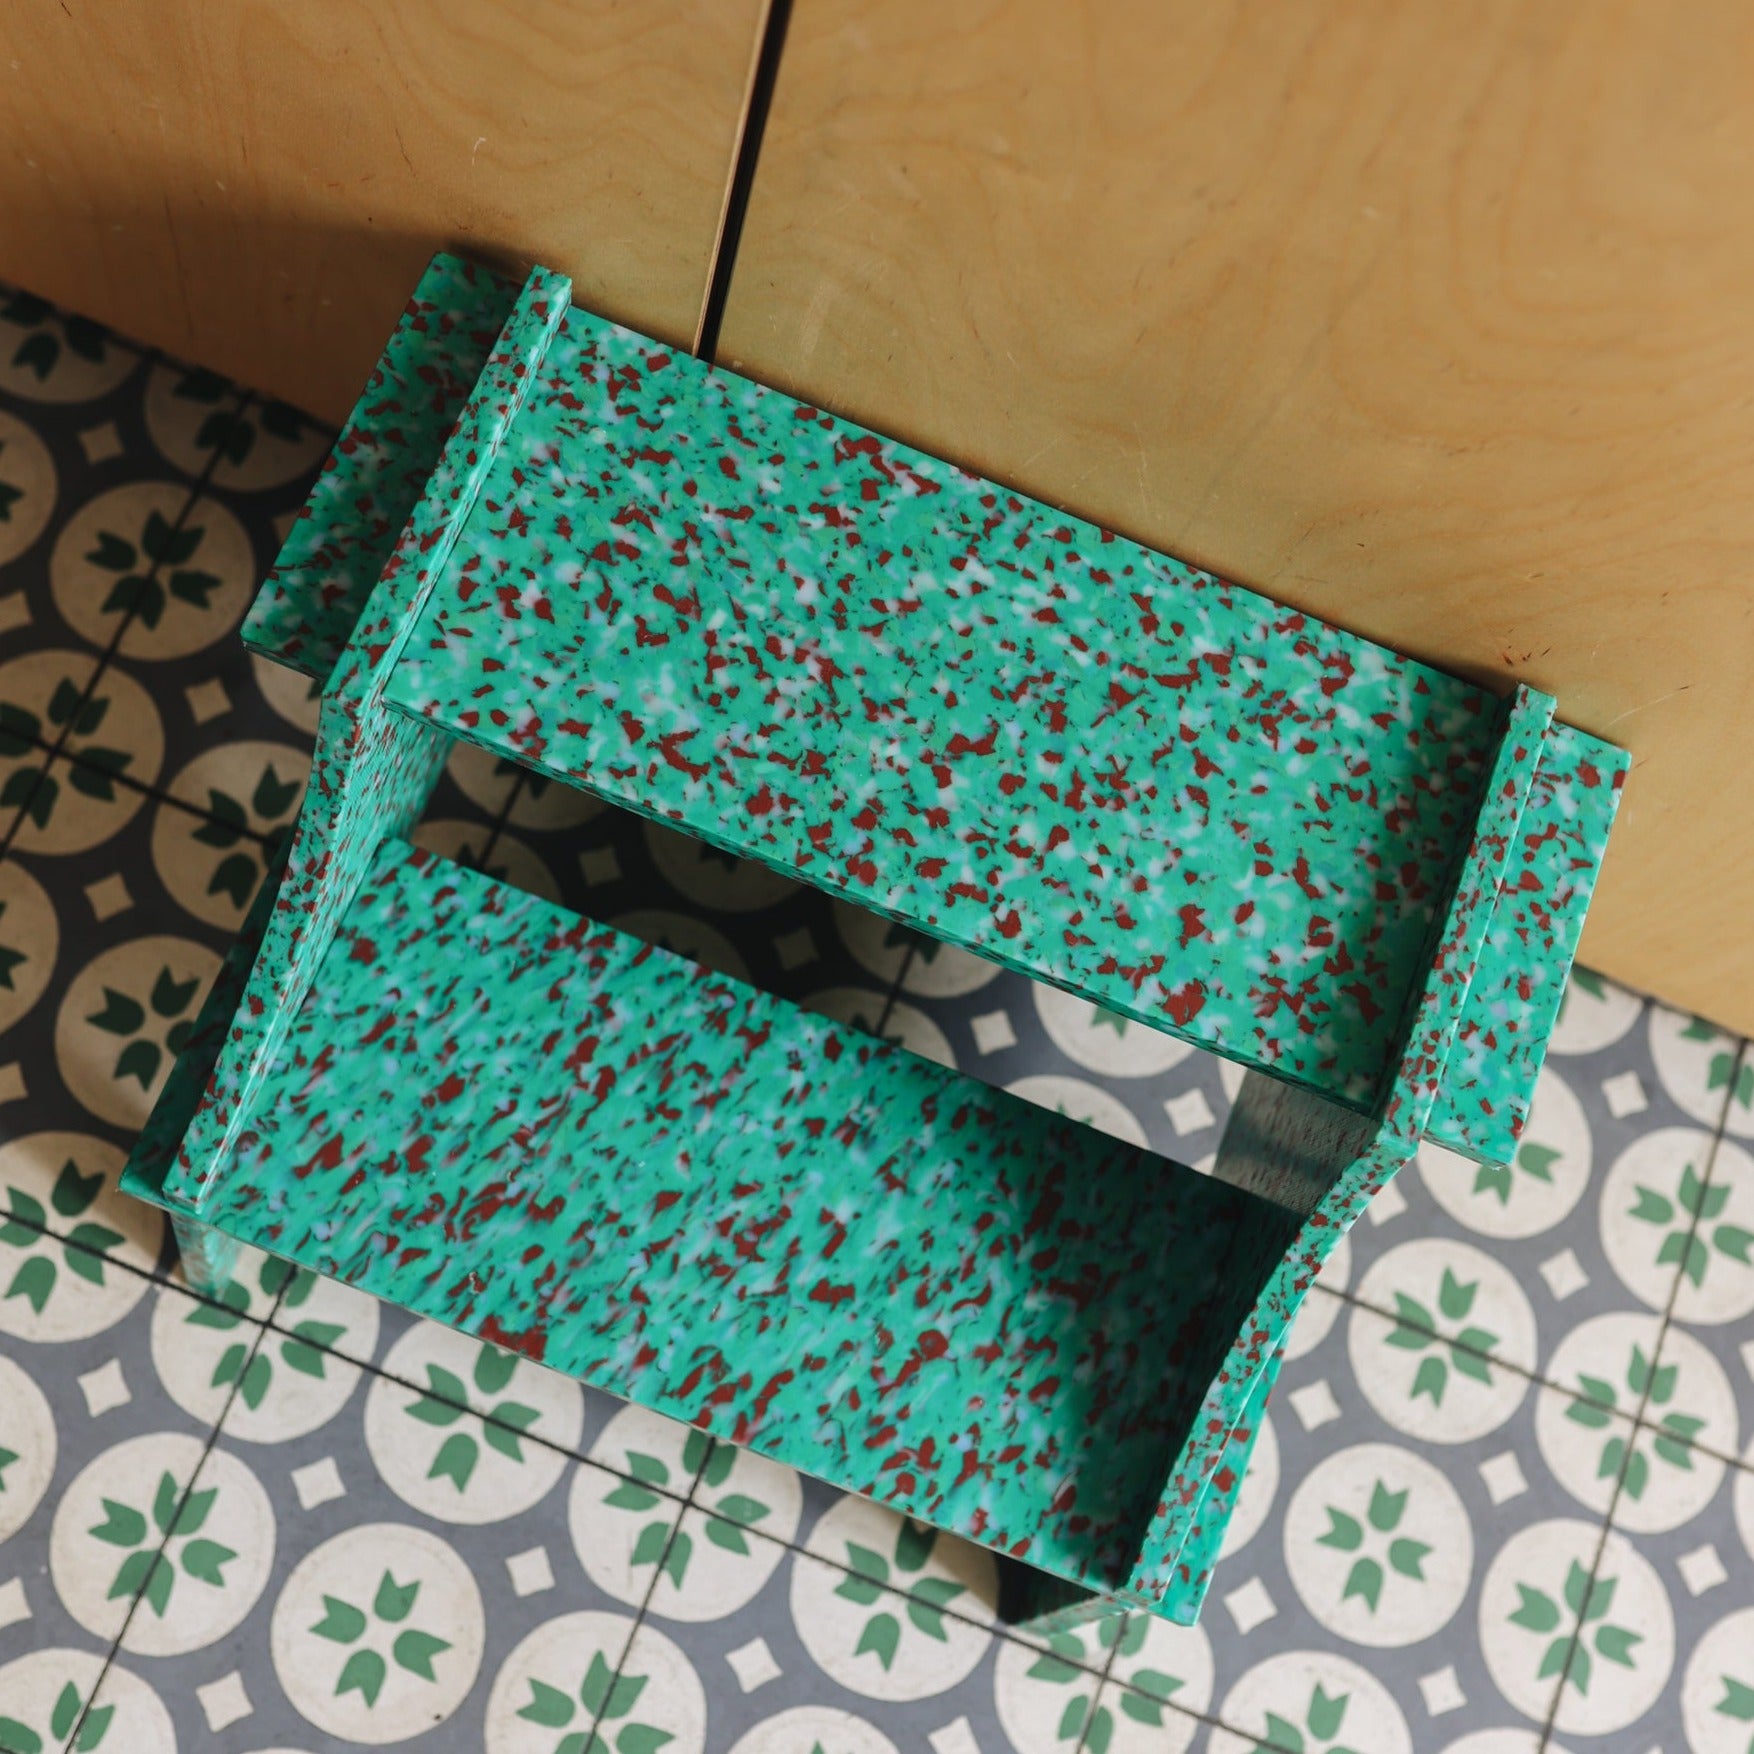 TOP VIEW OF GREEN STEP STOOL BY THE MINIMONO PROJECT - BRAND FOR ECO FRIENDLY - PLAYFUL - MULTI FUNCTIONAL - SUSTAINABLE - HIGH QUALITY - DESIGN FURNITURE FROM RECYCLED PLASTIC FOR BOTH ADULT AND CHILDREN MADE IN BERLIN GERMANY